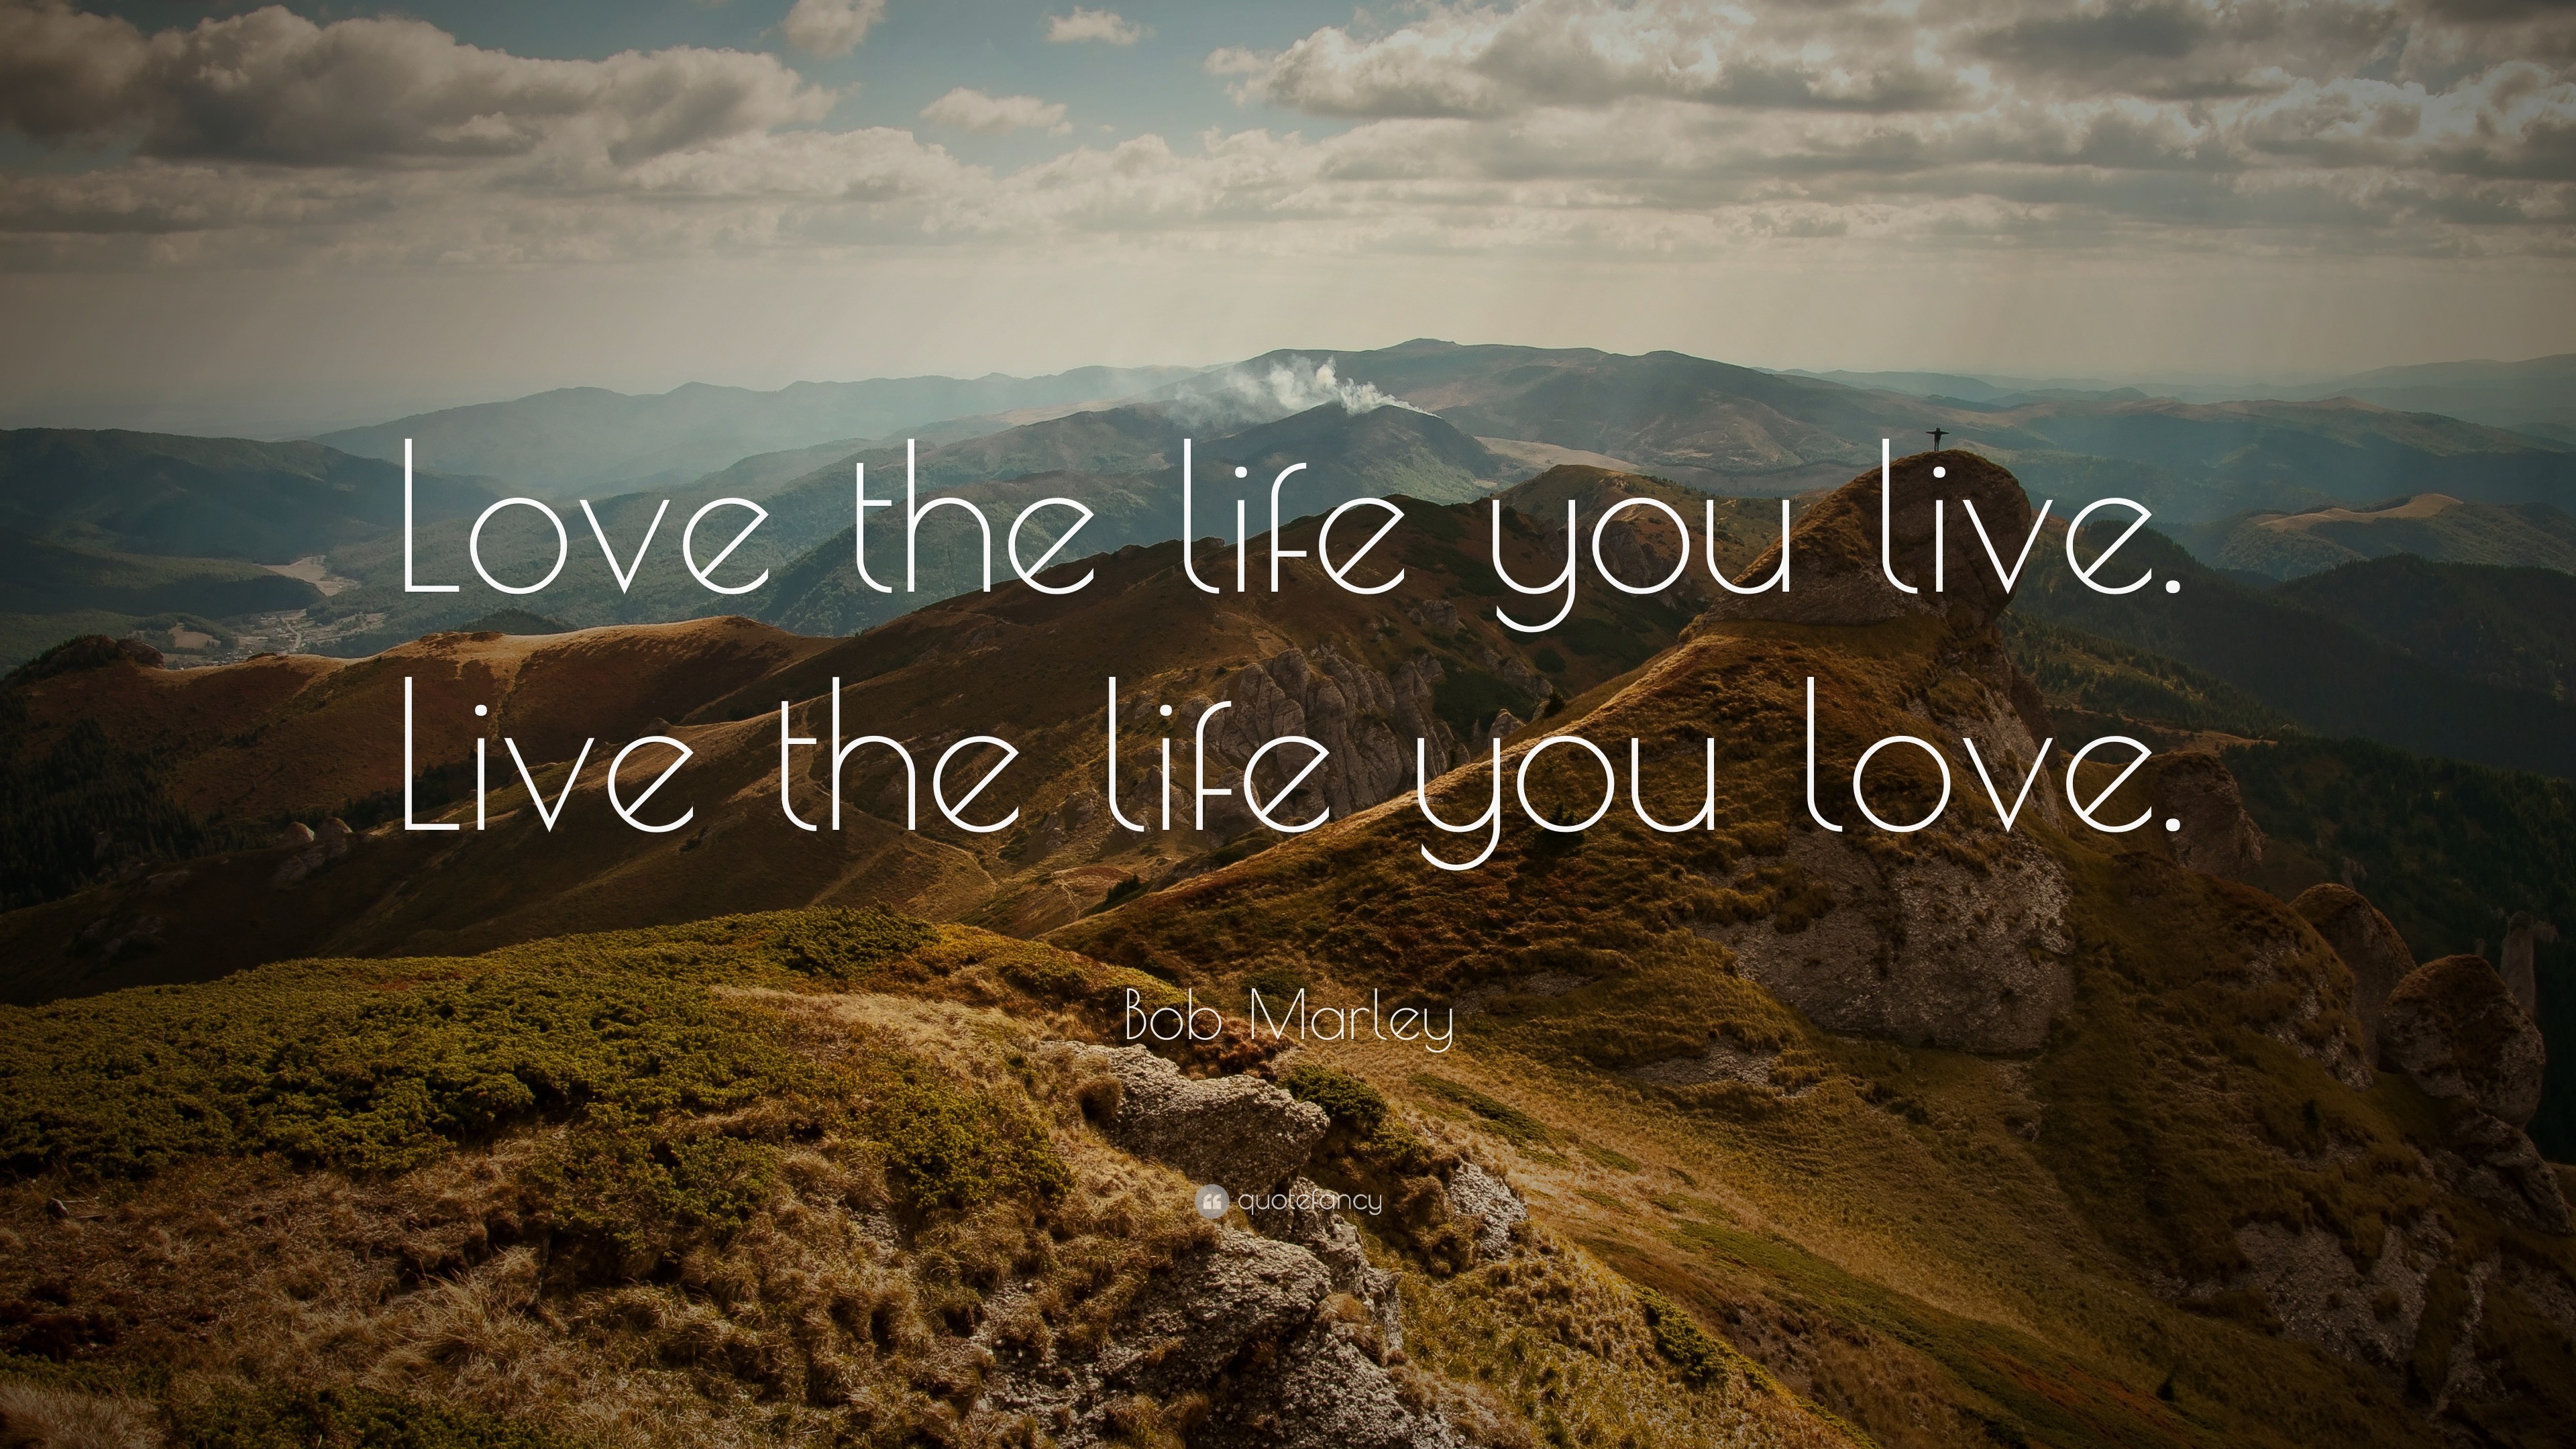 3840x2160 Bob Marley Quote: “Love the life you live. Live the life you love